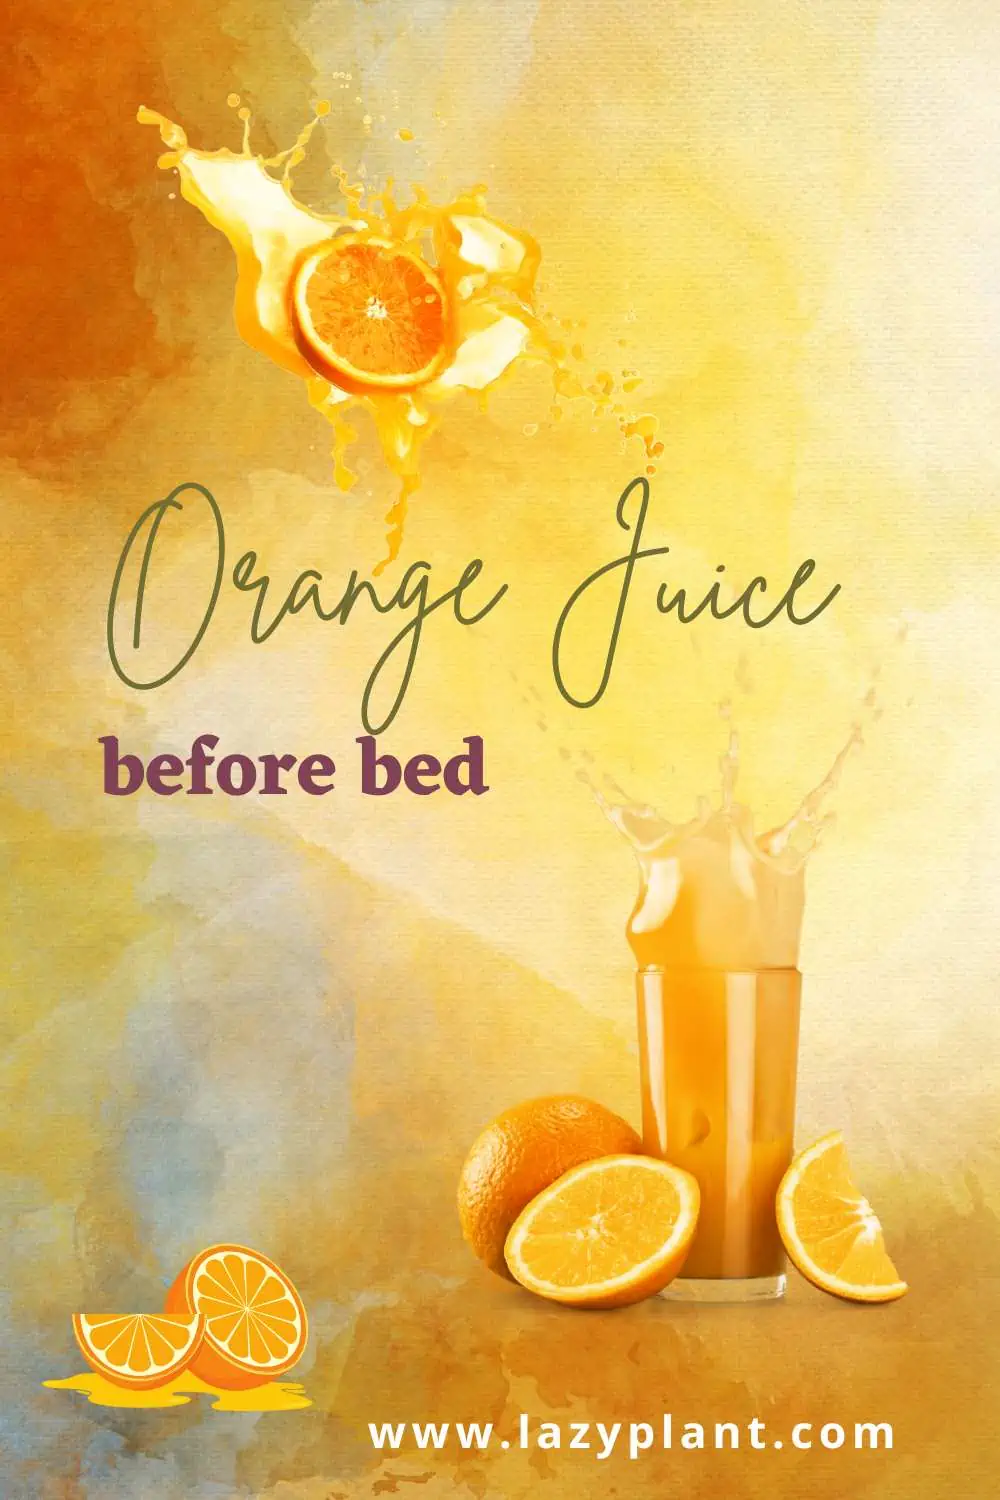 How much orange juice can I drink at dinner for better sleep & weight loss?